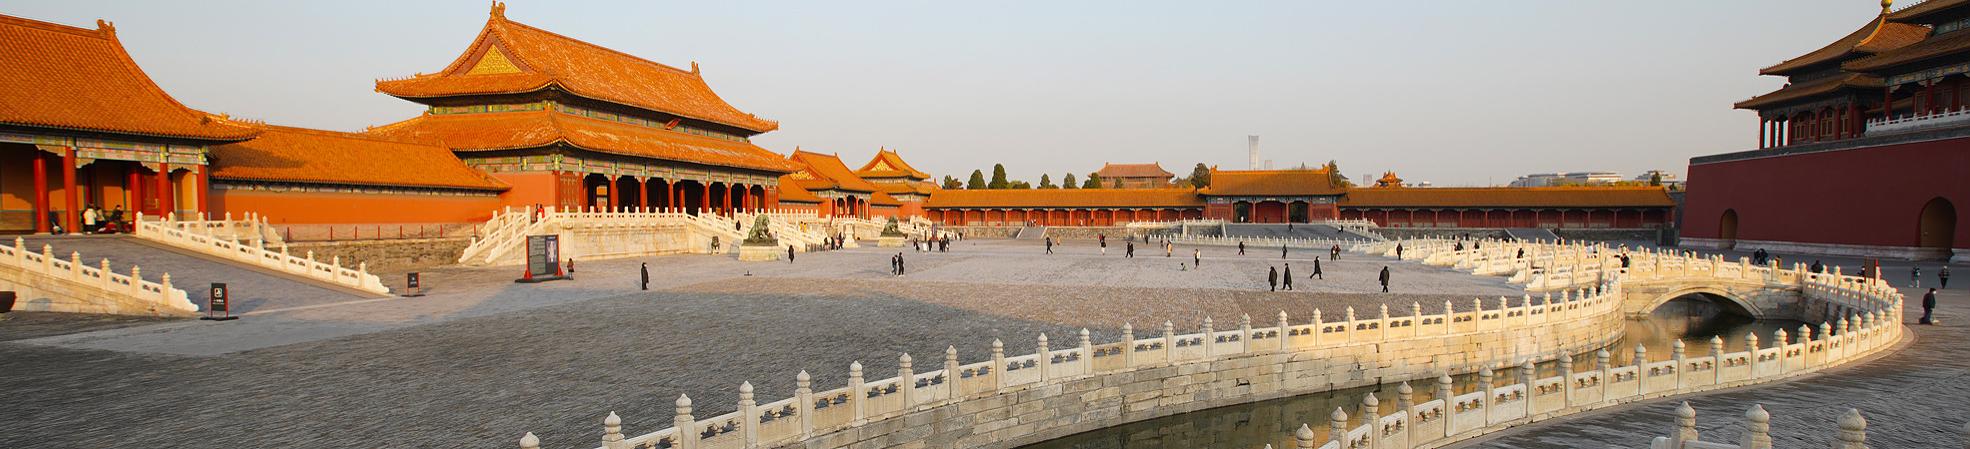 Beijing Qing Dynasty Imperial Tombs